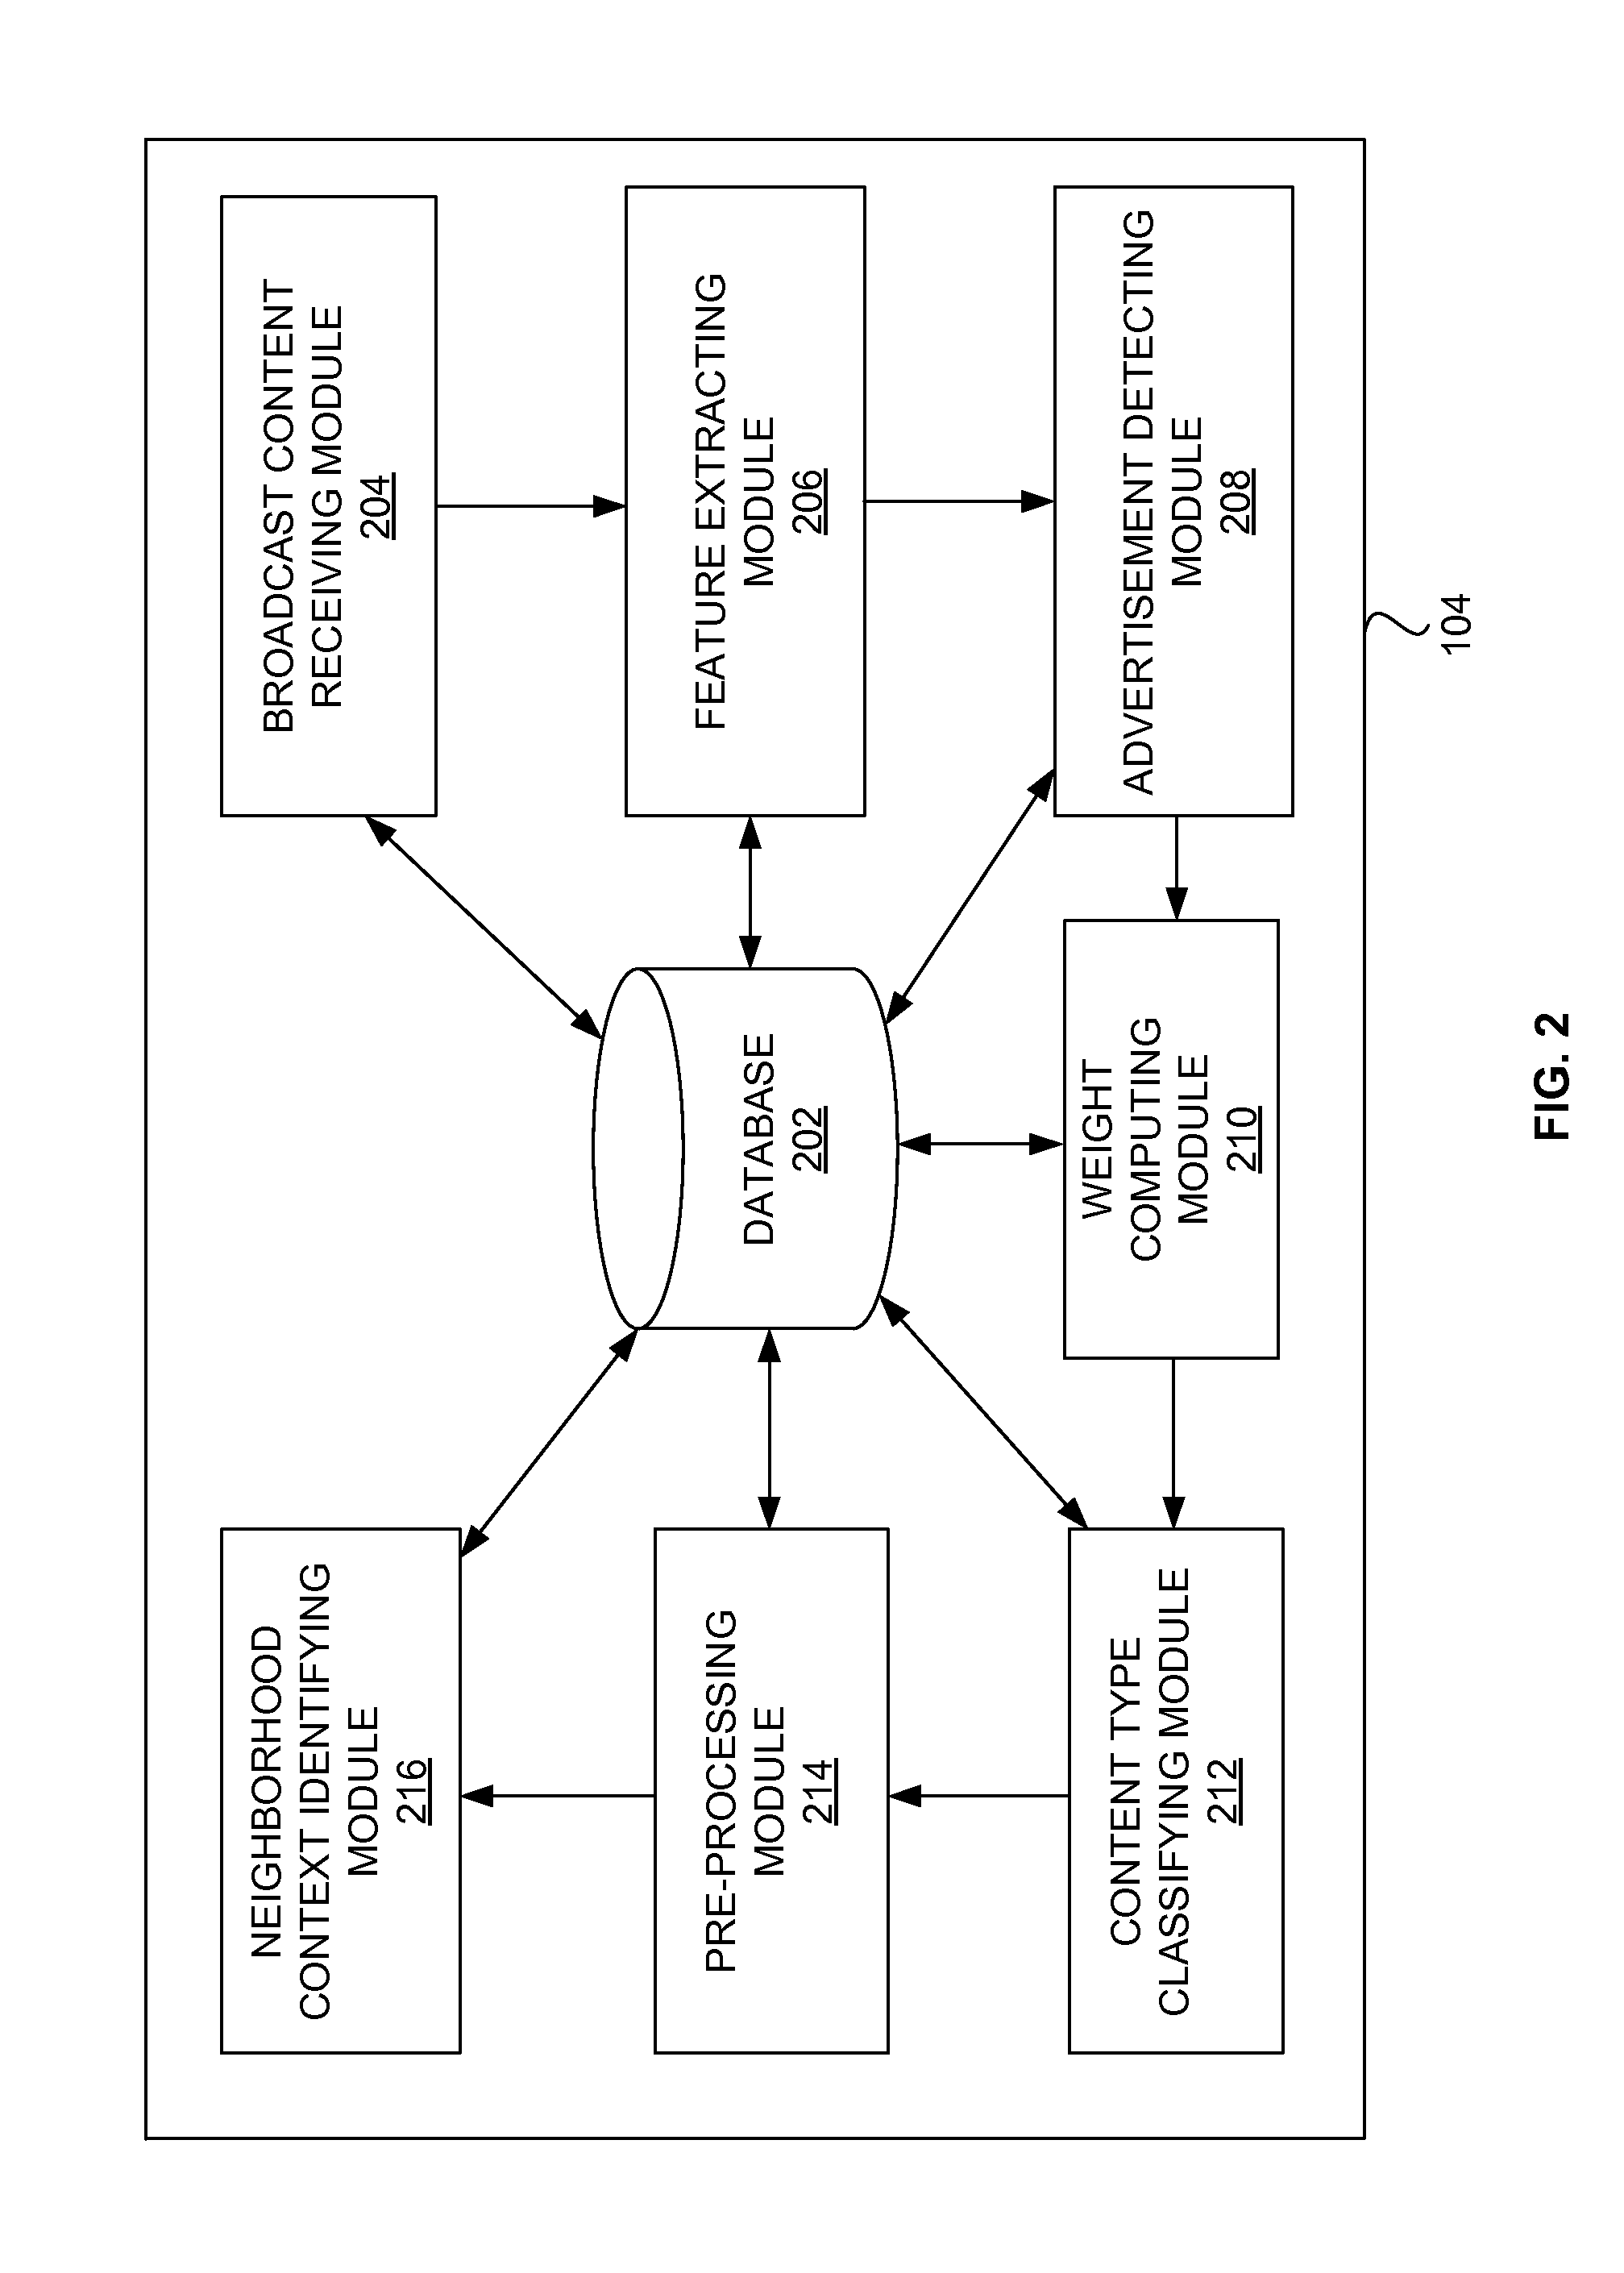 System and method for detecting streaming of advertisements that occur while streaming a media program